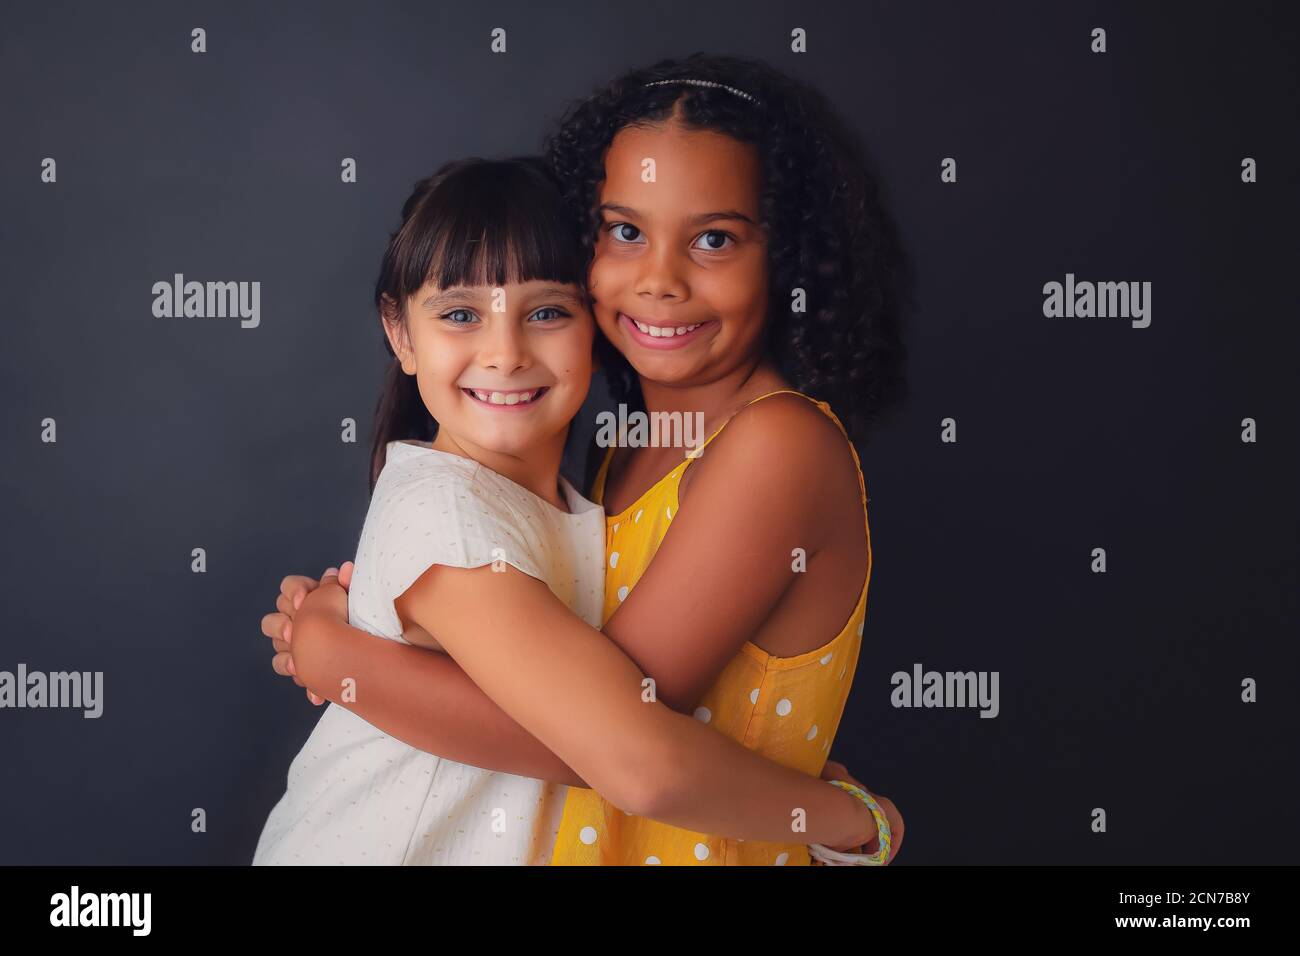 A 8-9 year old white girl and a 9-10 year old Africa American girl are hugging each other, and looking at the camera. They look happy and friendly. Stock Photo